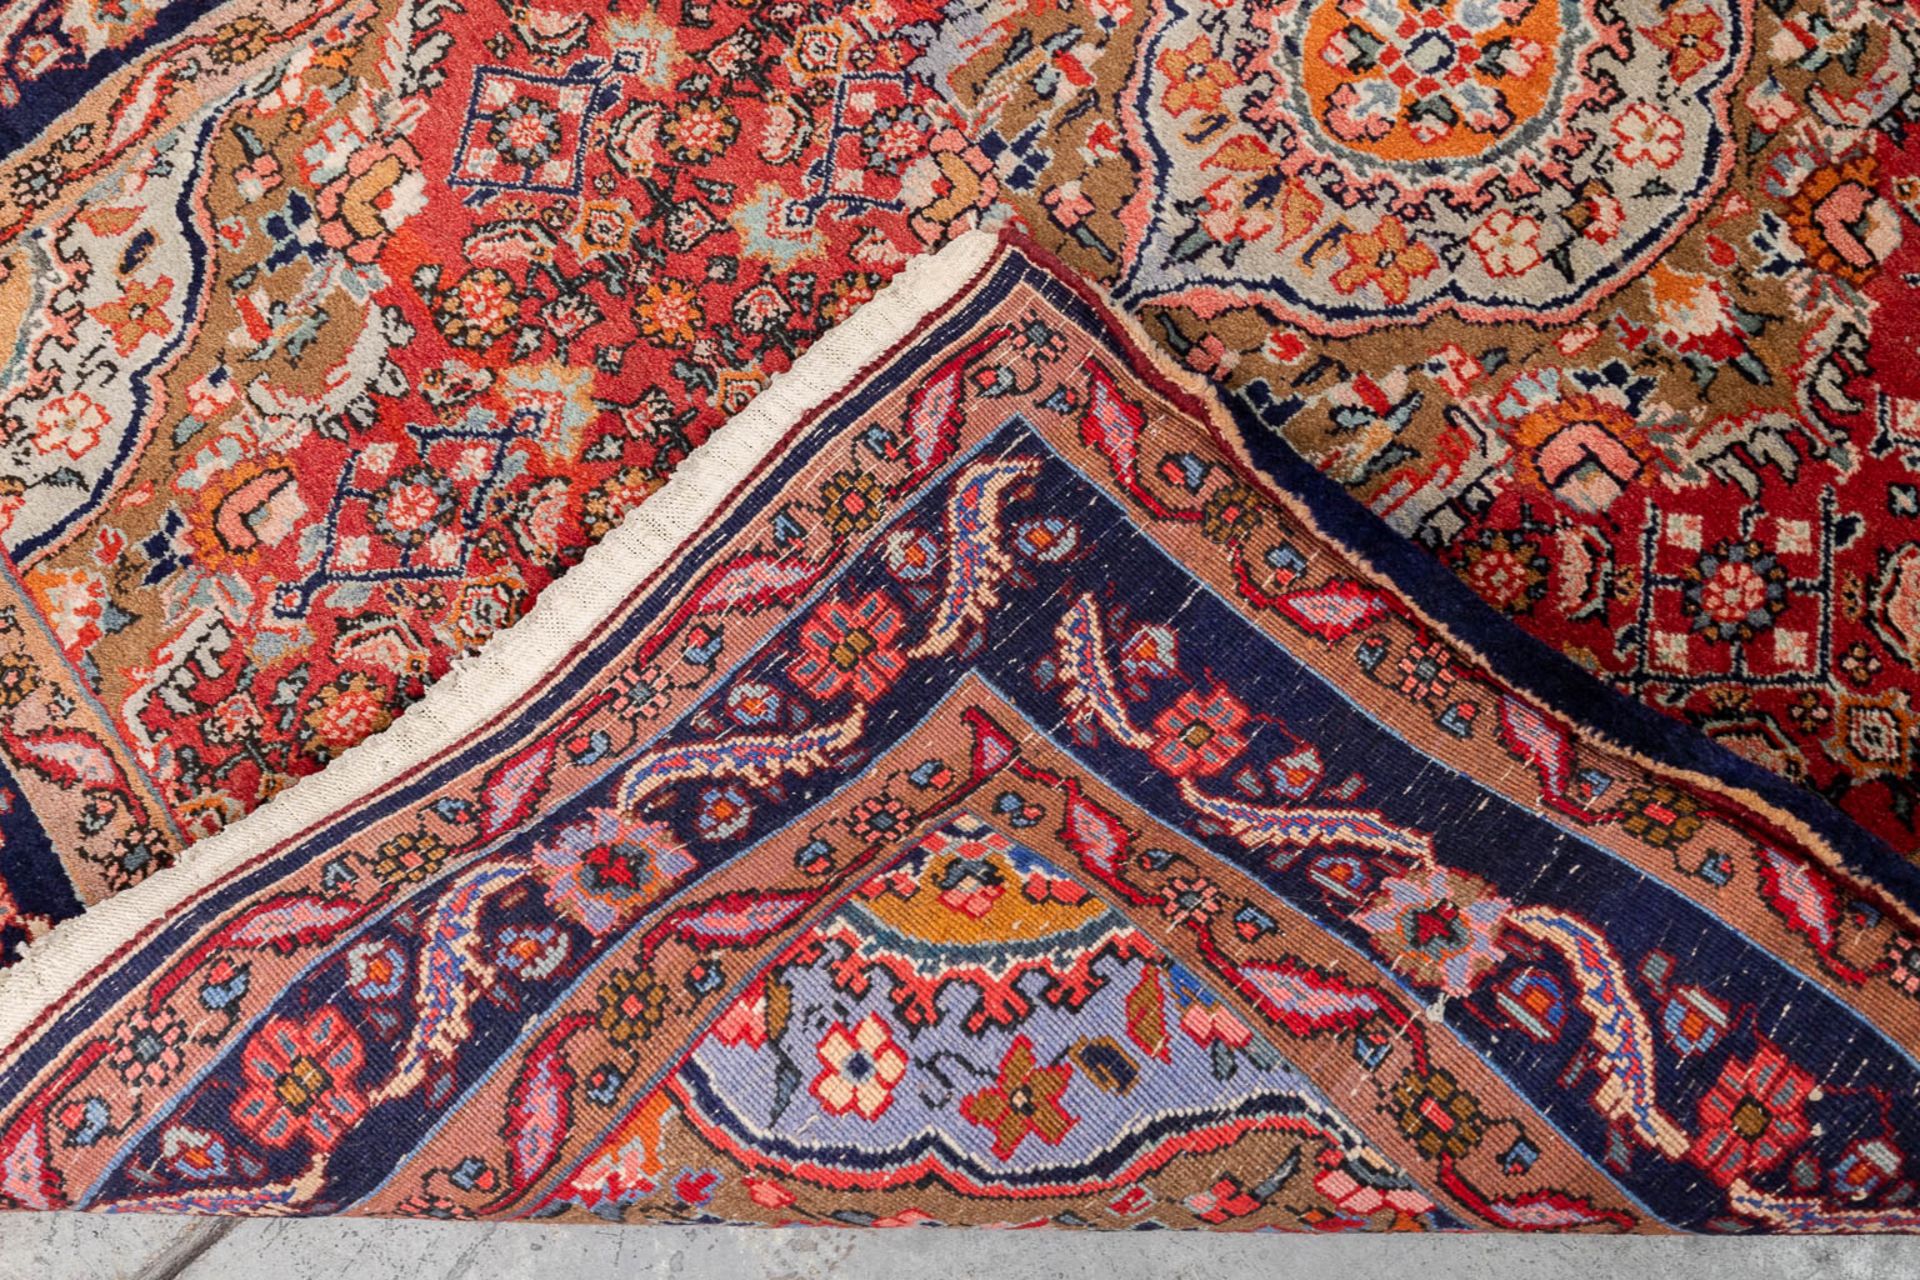 A collection of 3 Oriental hand-made carpets. Kashan and a prayer rug. (L: 180 x W: 119 cm) - Image 10 of 12